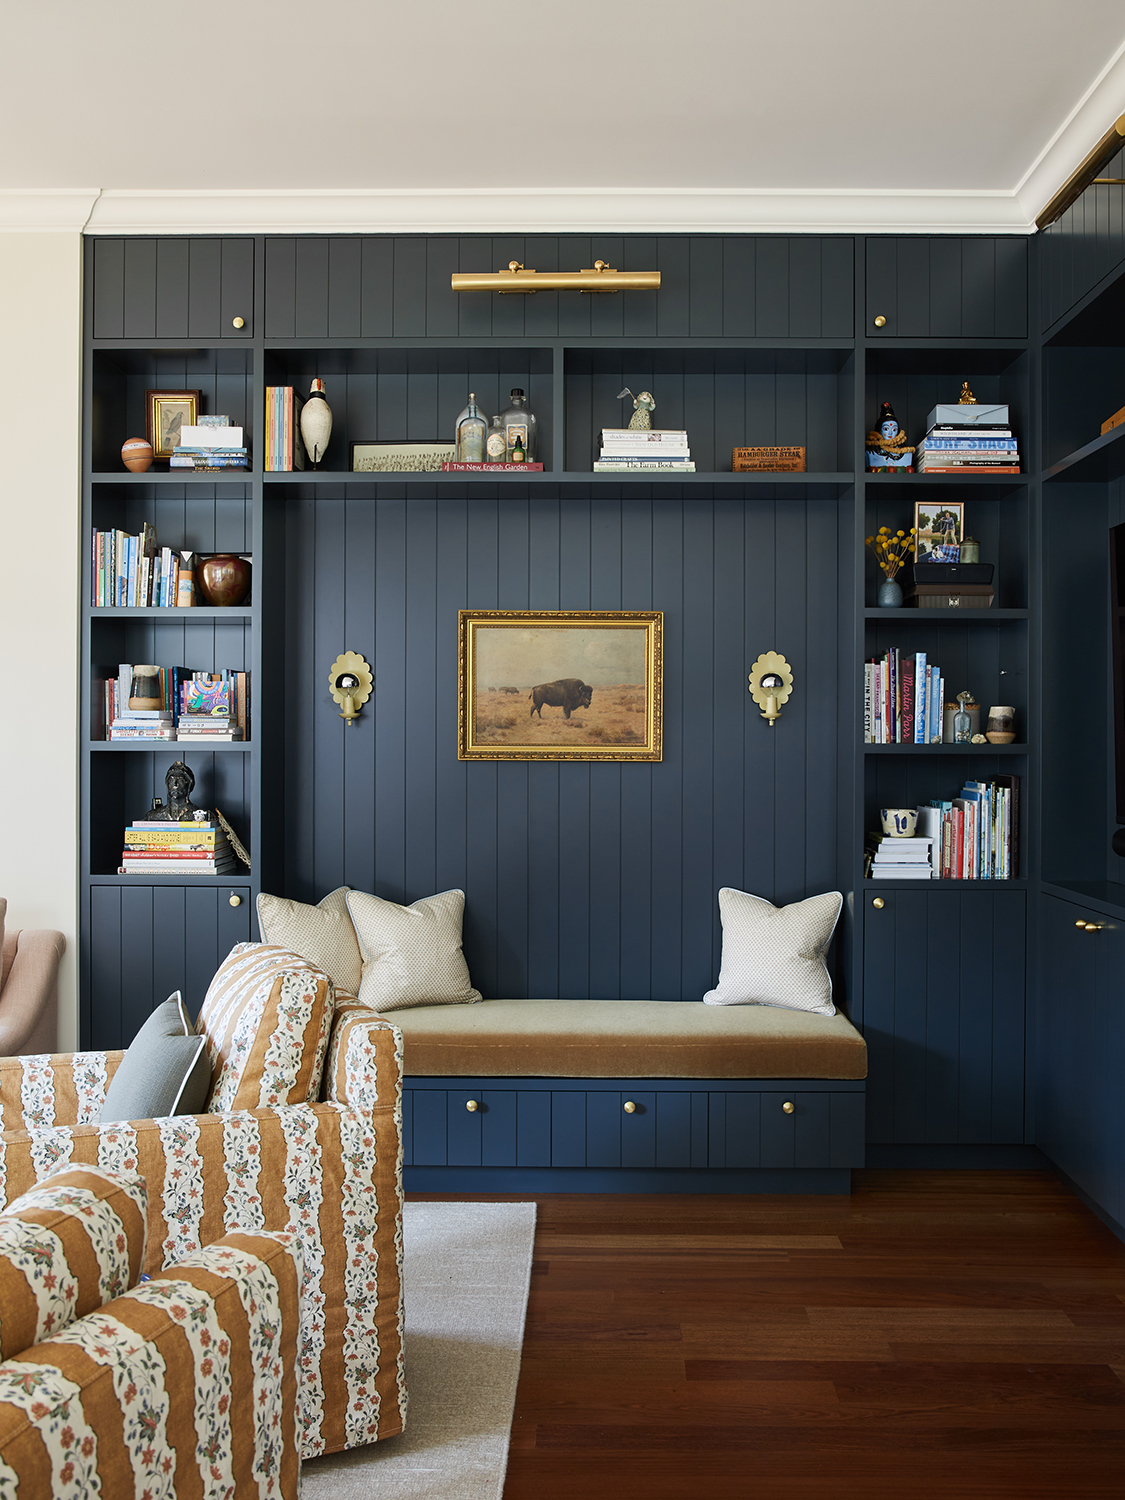 Living room with built-in shelves painted navy